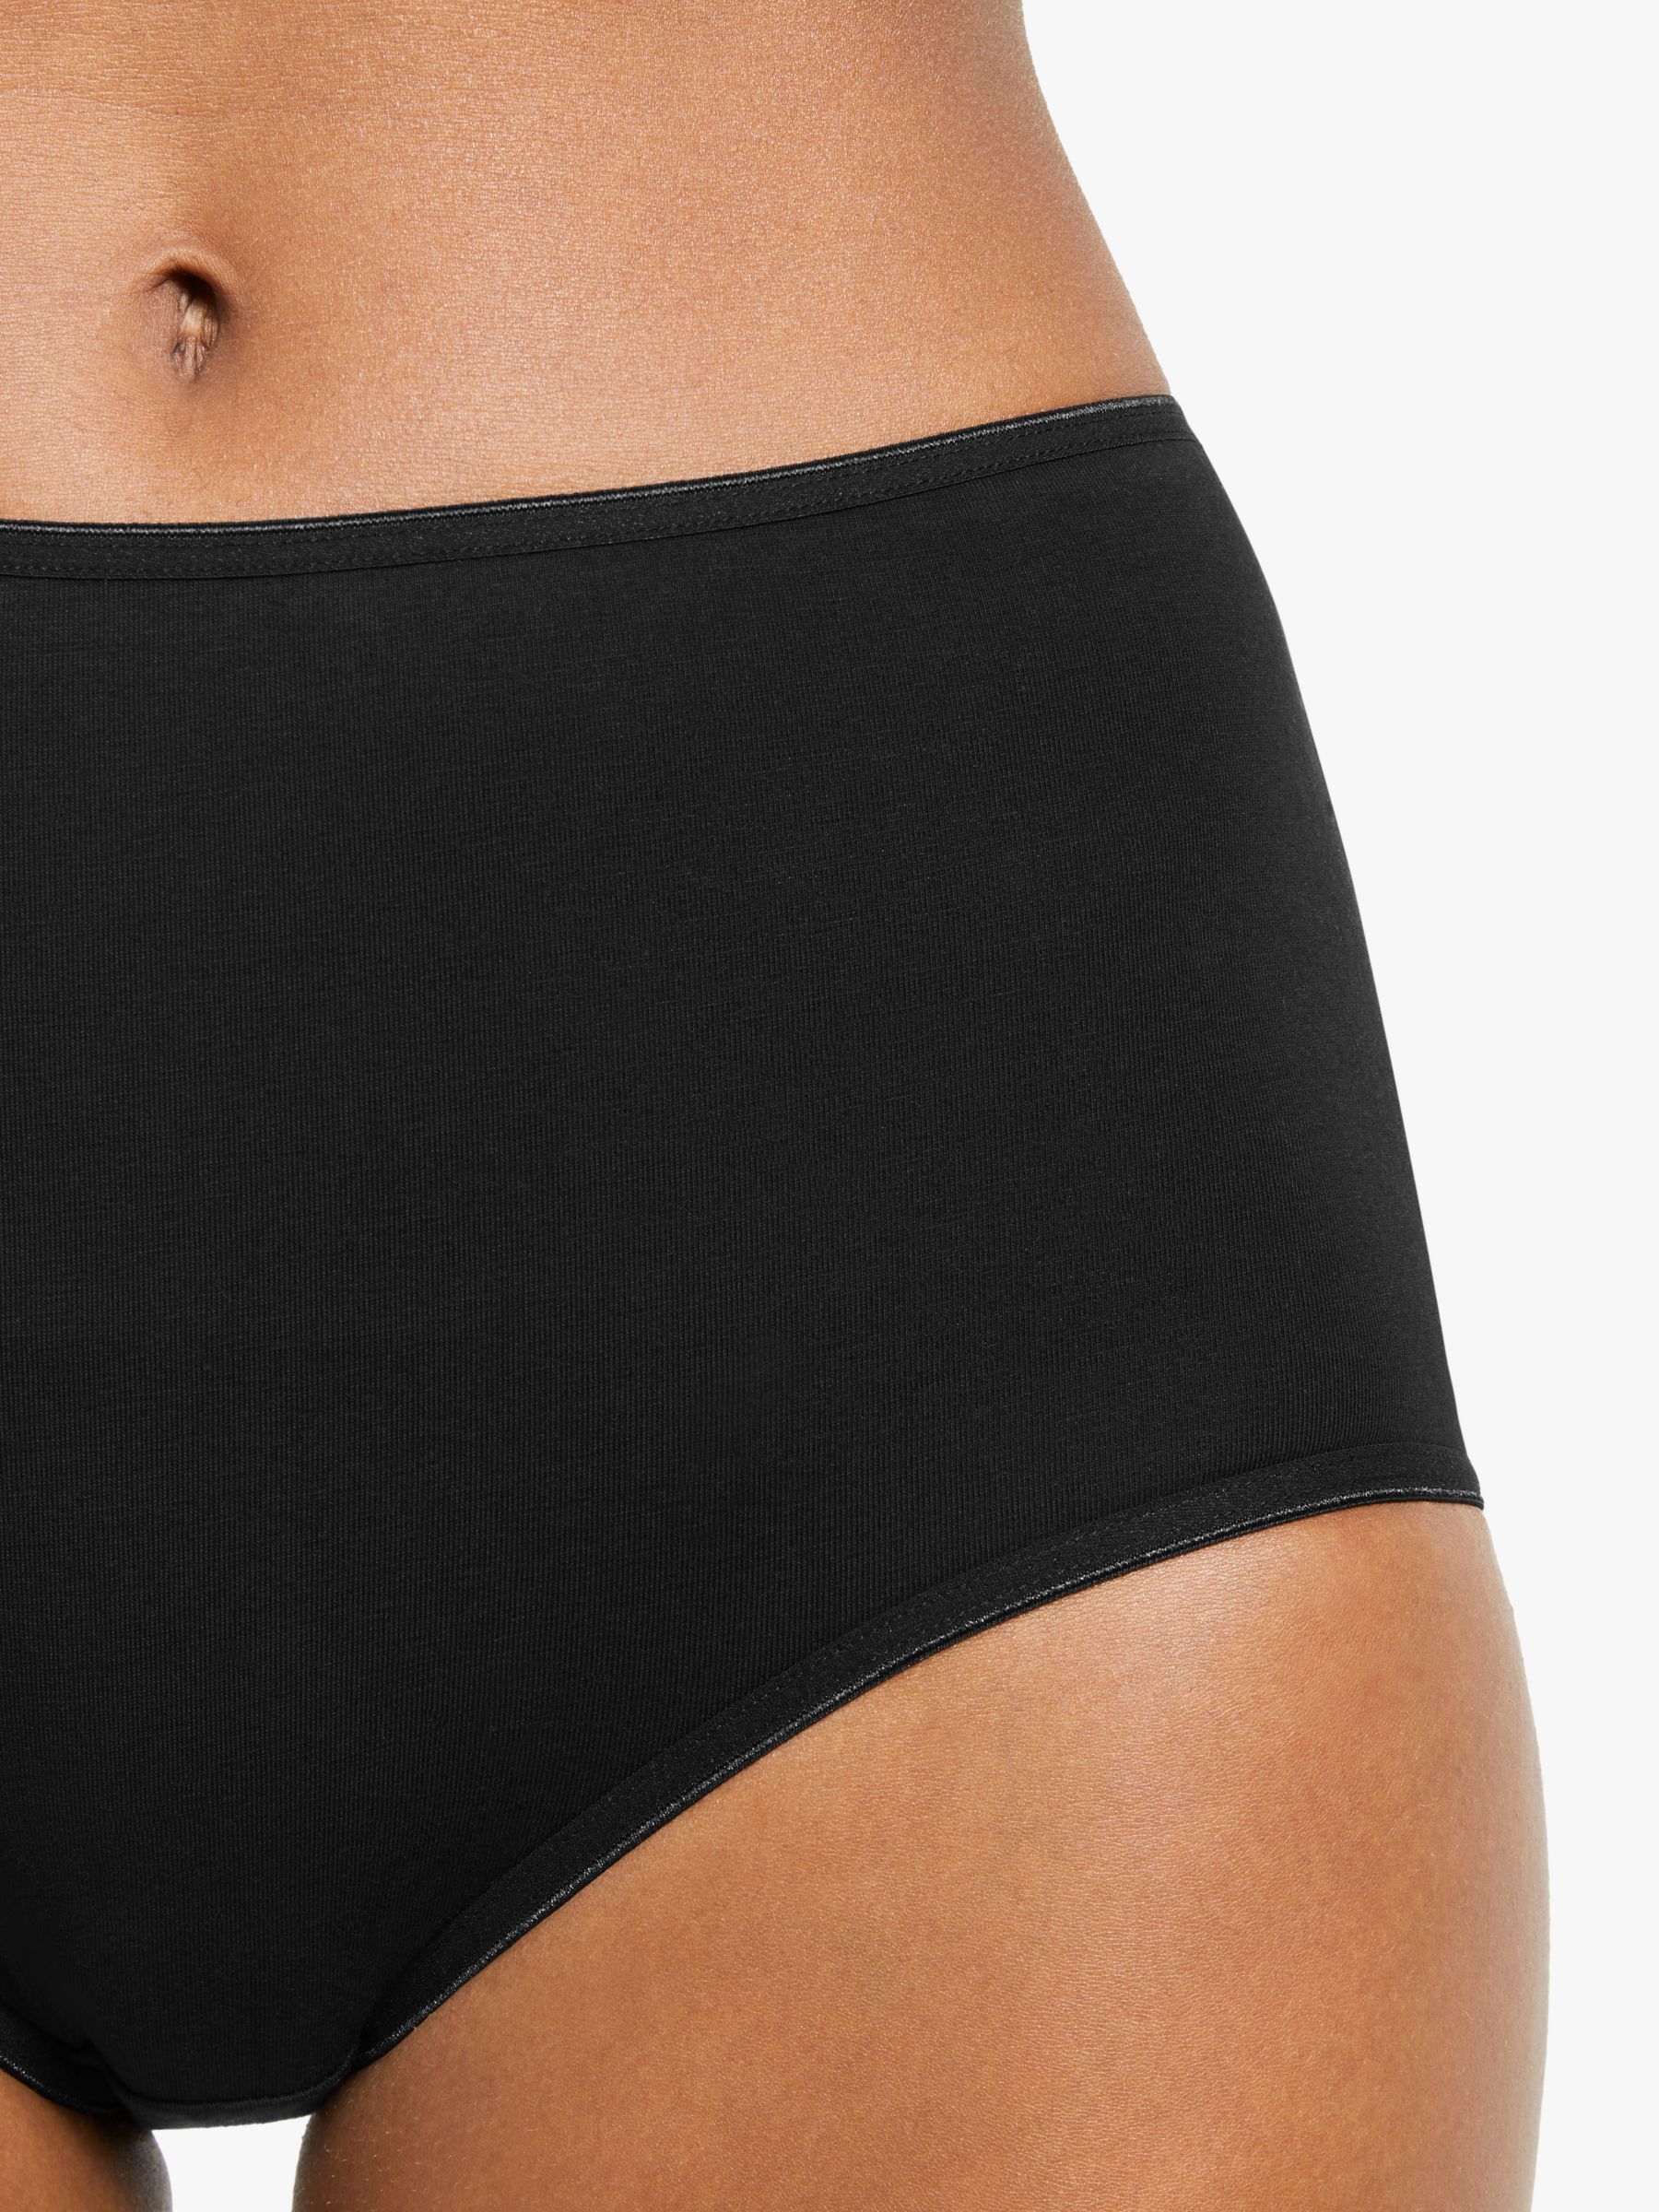 John Lewis ANYDAY Cotton Full Briefs, Pack of 5, Black at John Lewis &  Partners